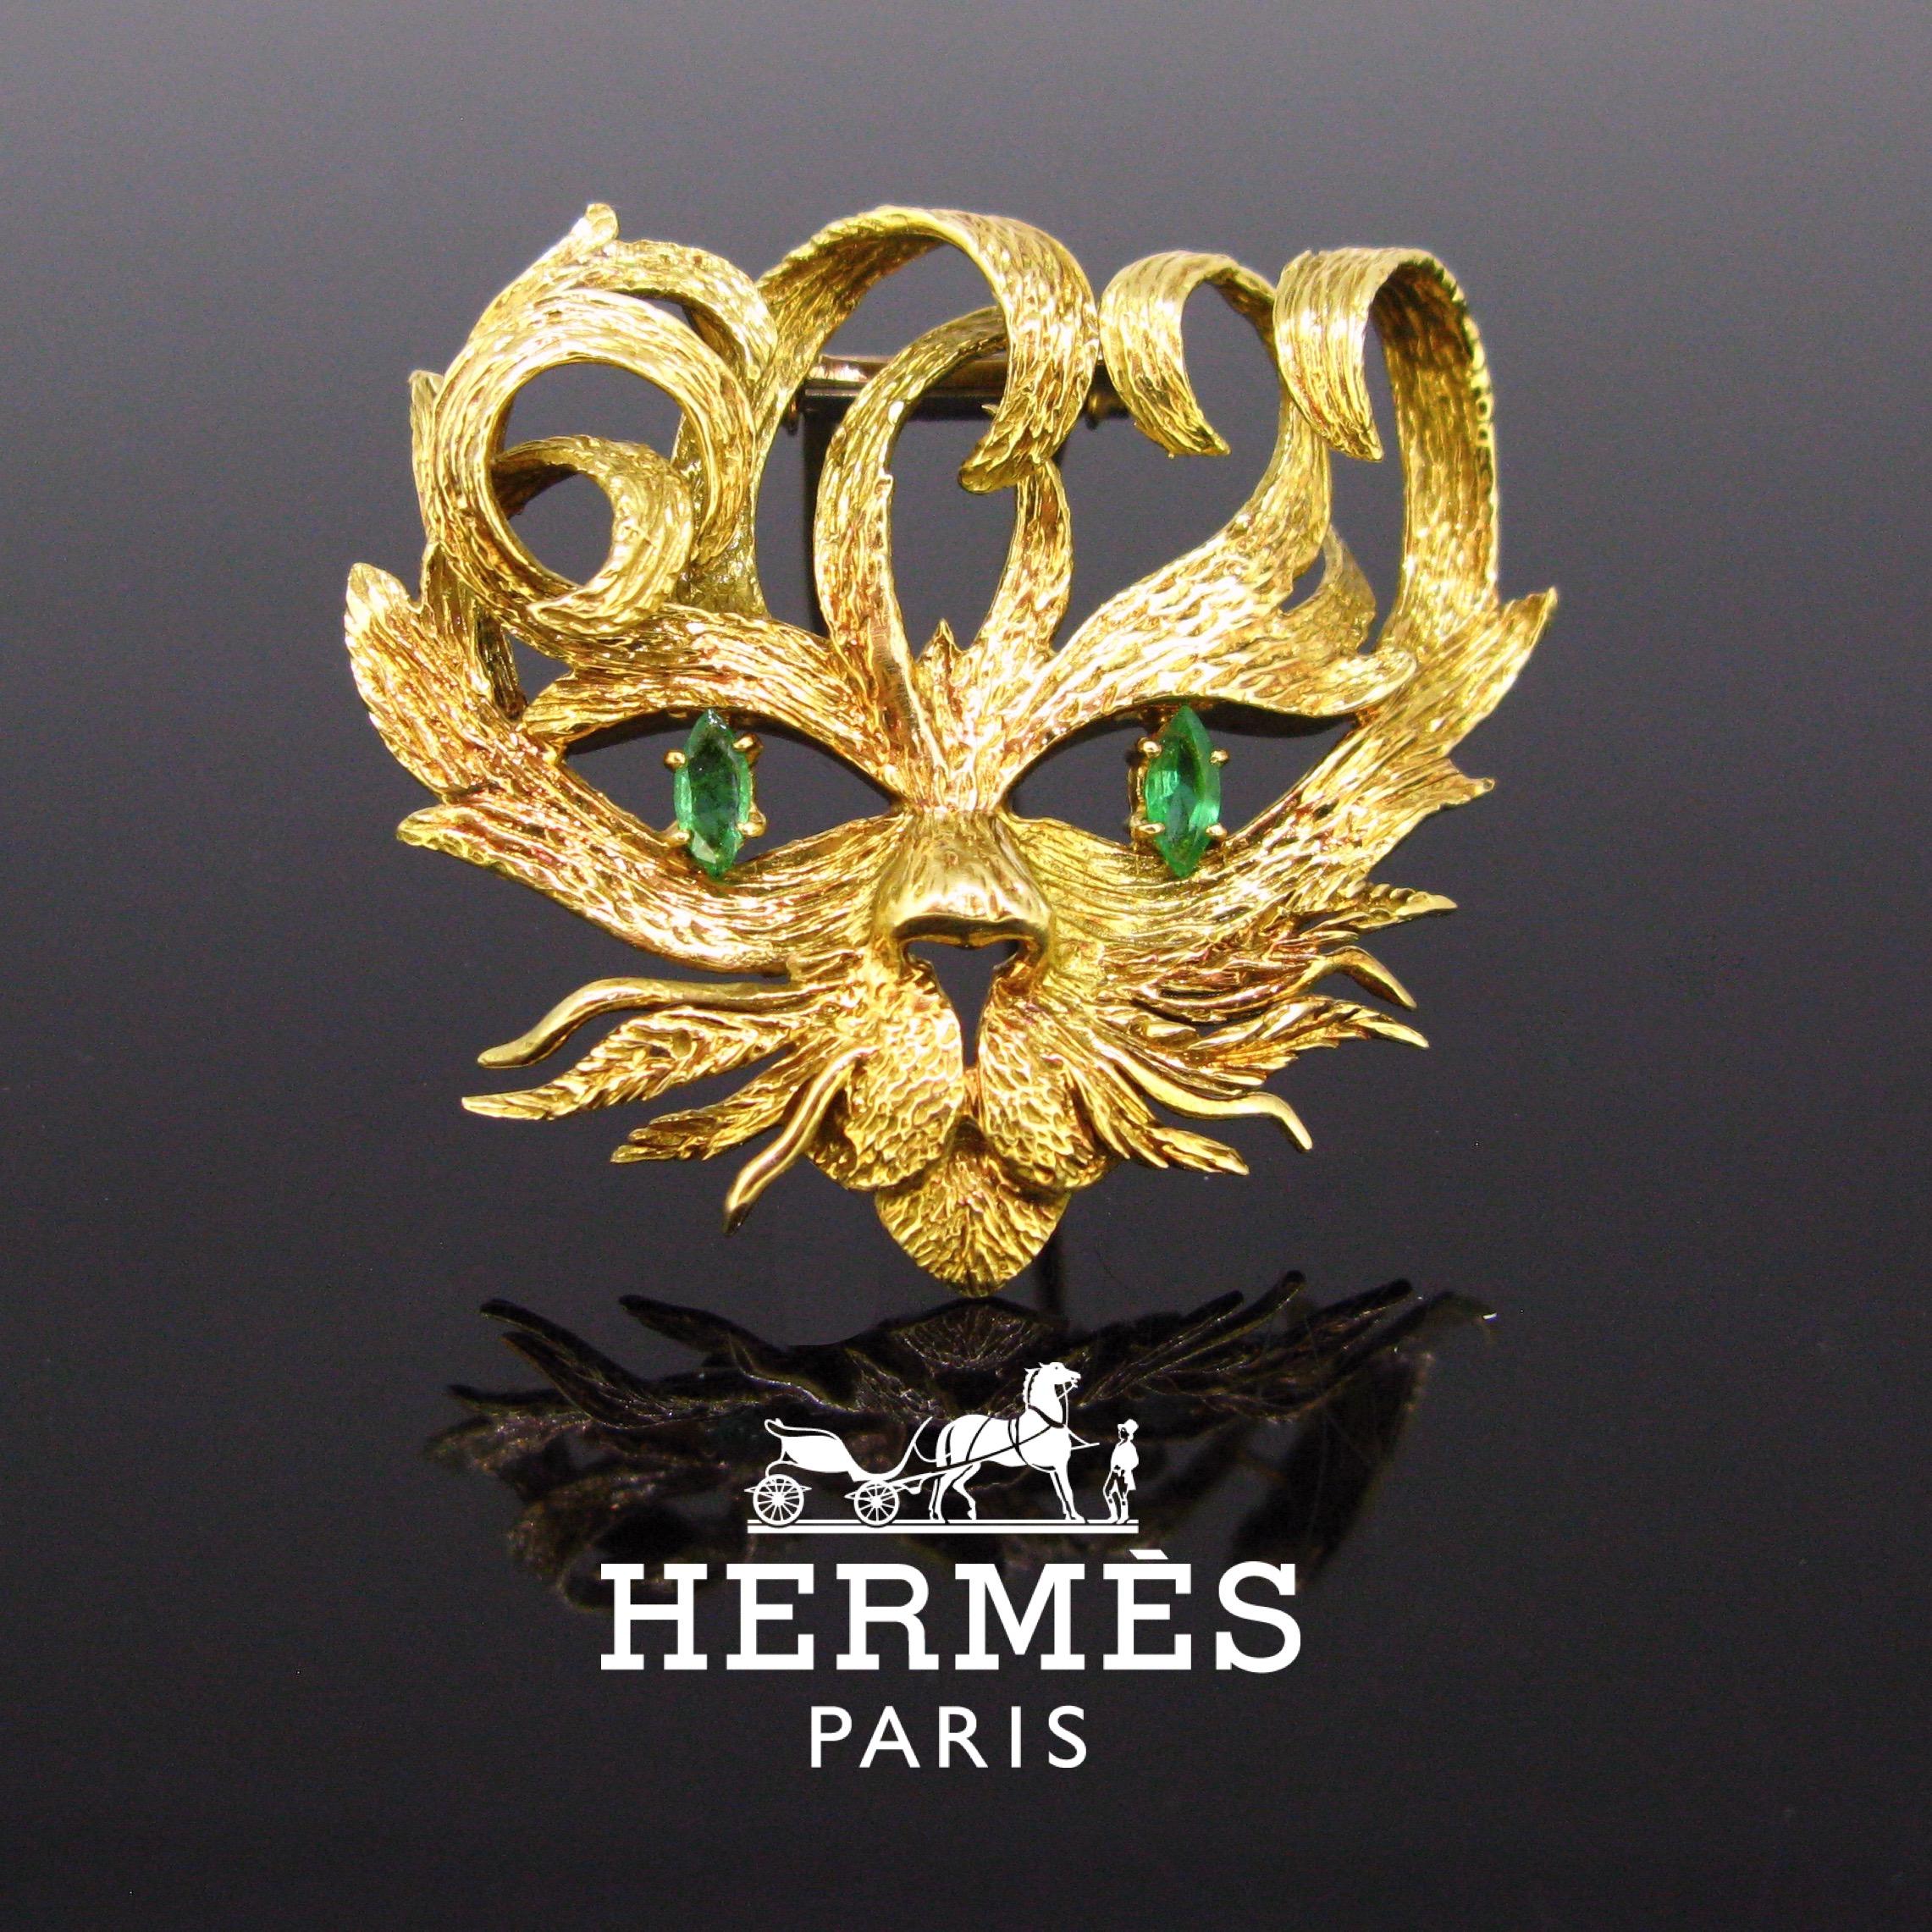 This brooch was made from a drawing of Jean Cocteau, a famous French poet, writer and designer, in the 1960s. It is the Mistigri Brooch by Hermès. Mistigri is a French name for a cat. The brooch is fully made in 18kt yellow gold. The eyes are in